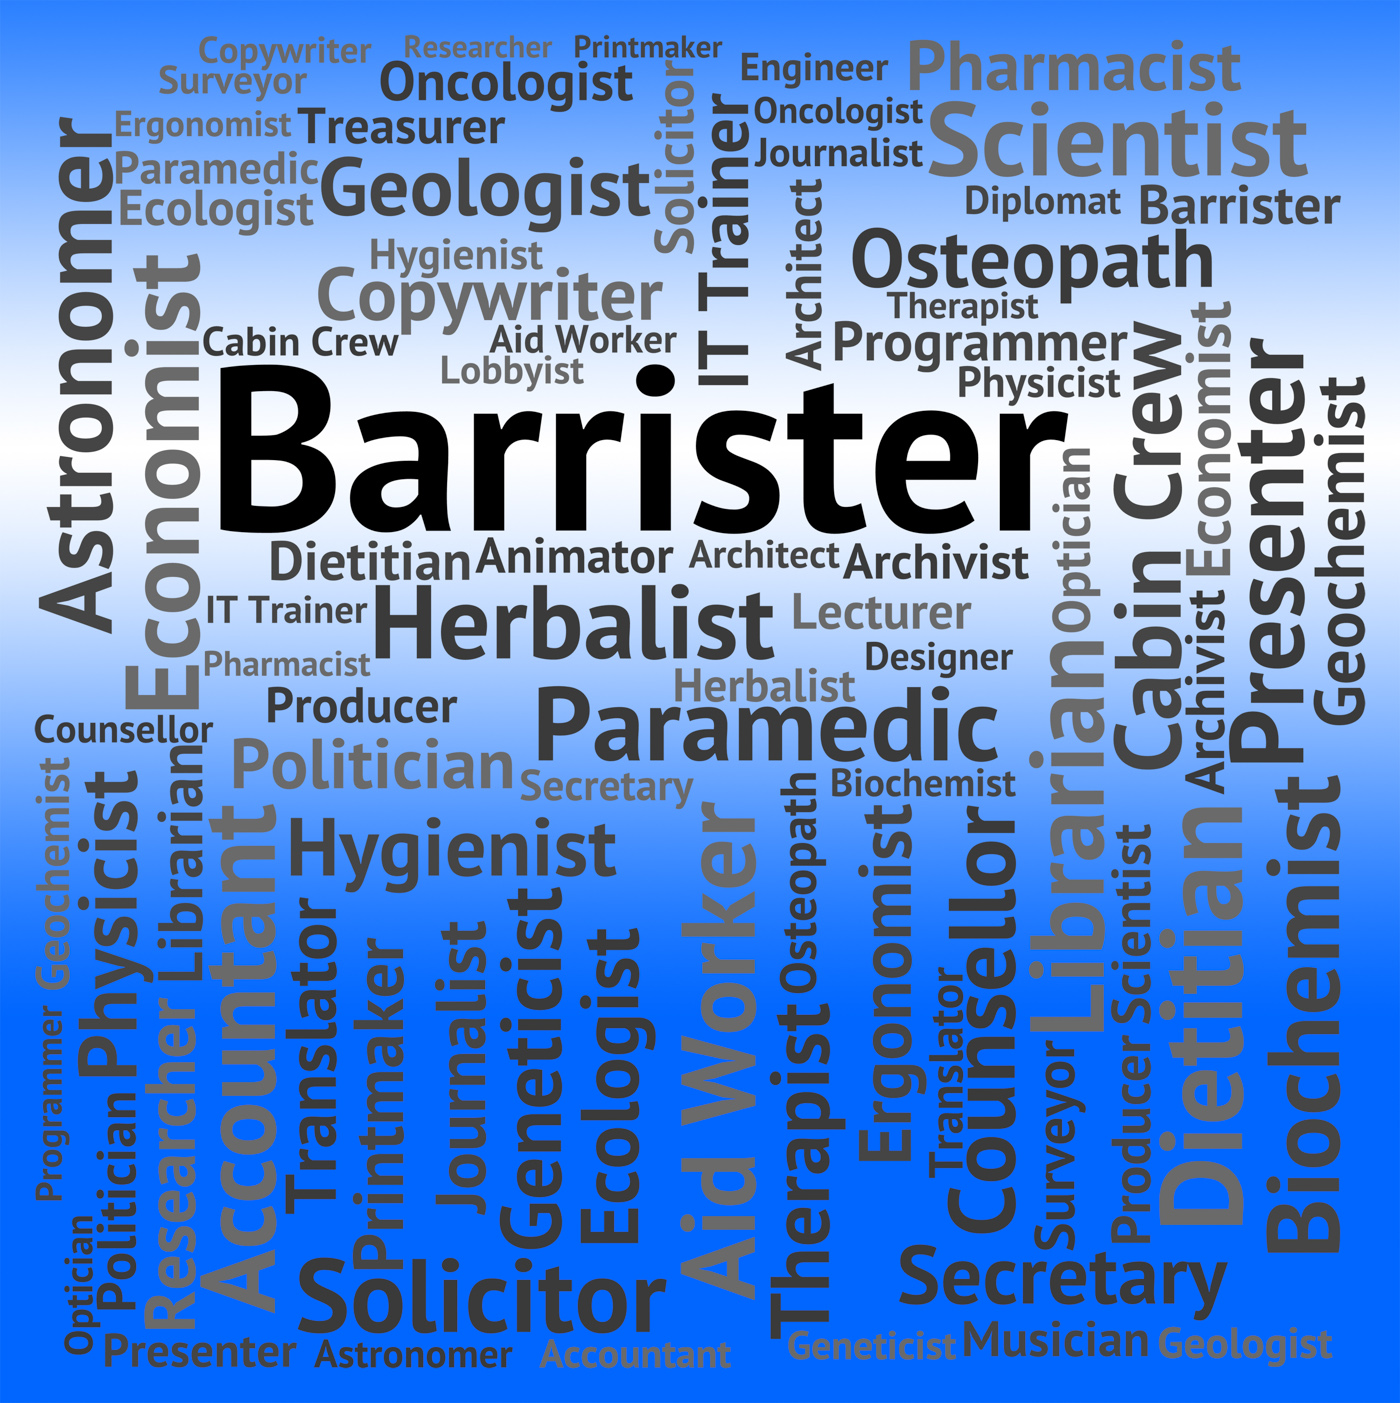 Barrister job shows jobs barristers and occupation photo